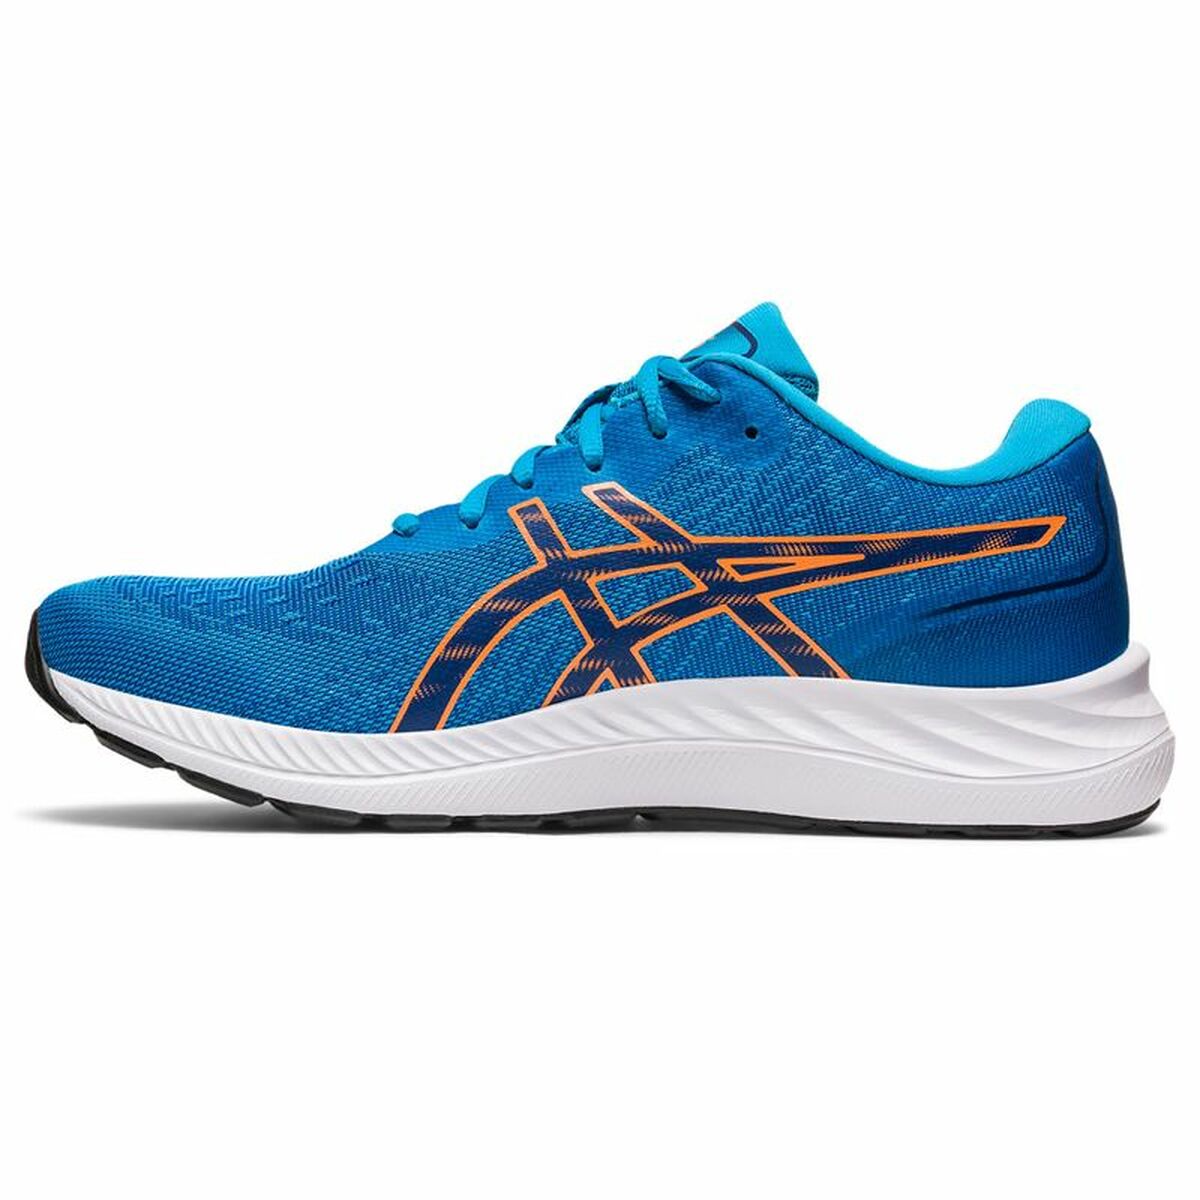 Shoes for Asics Gel-Excite 9 Blue UrbanHeer